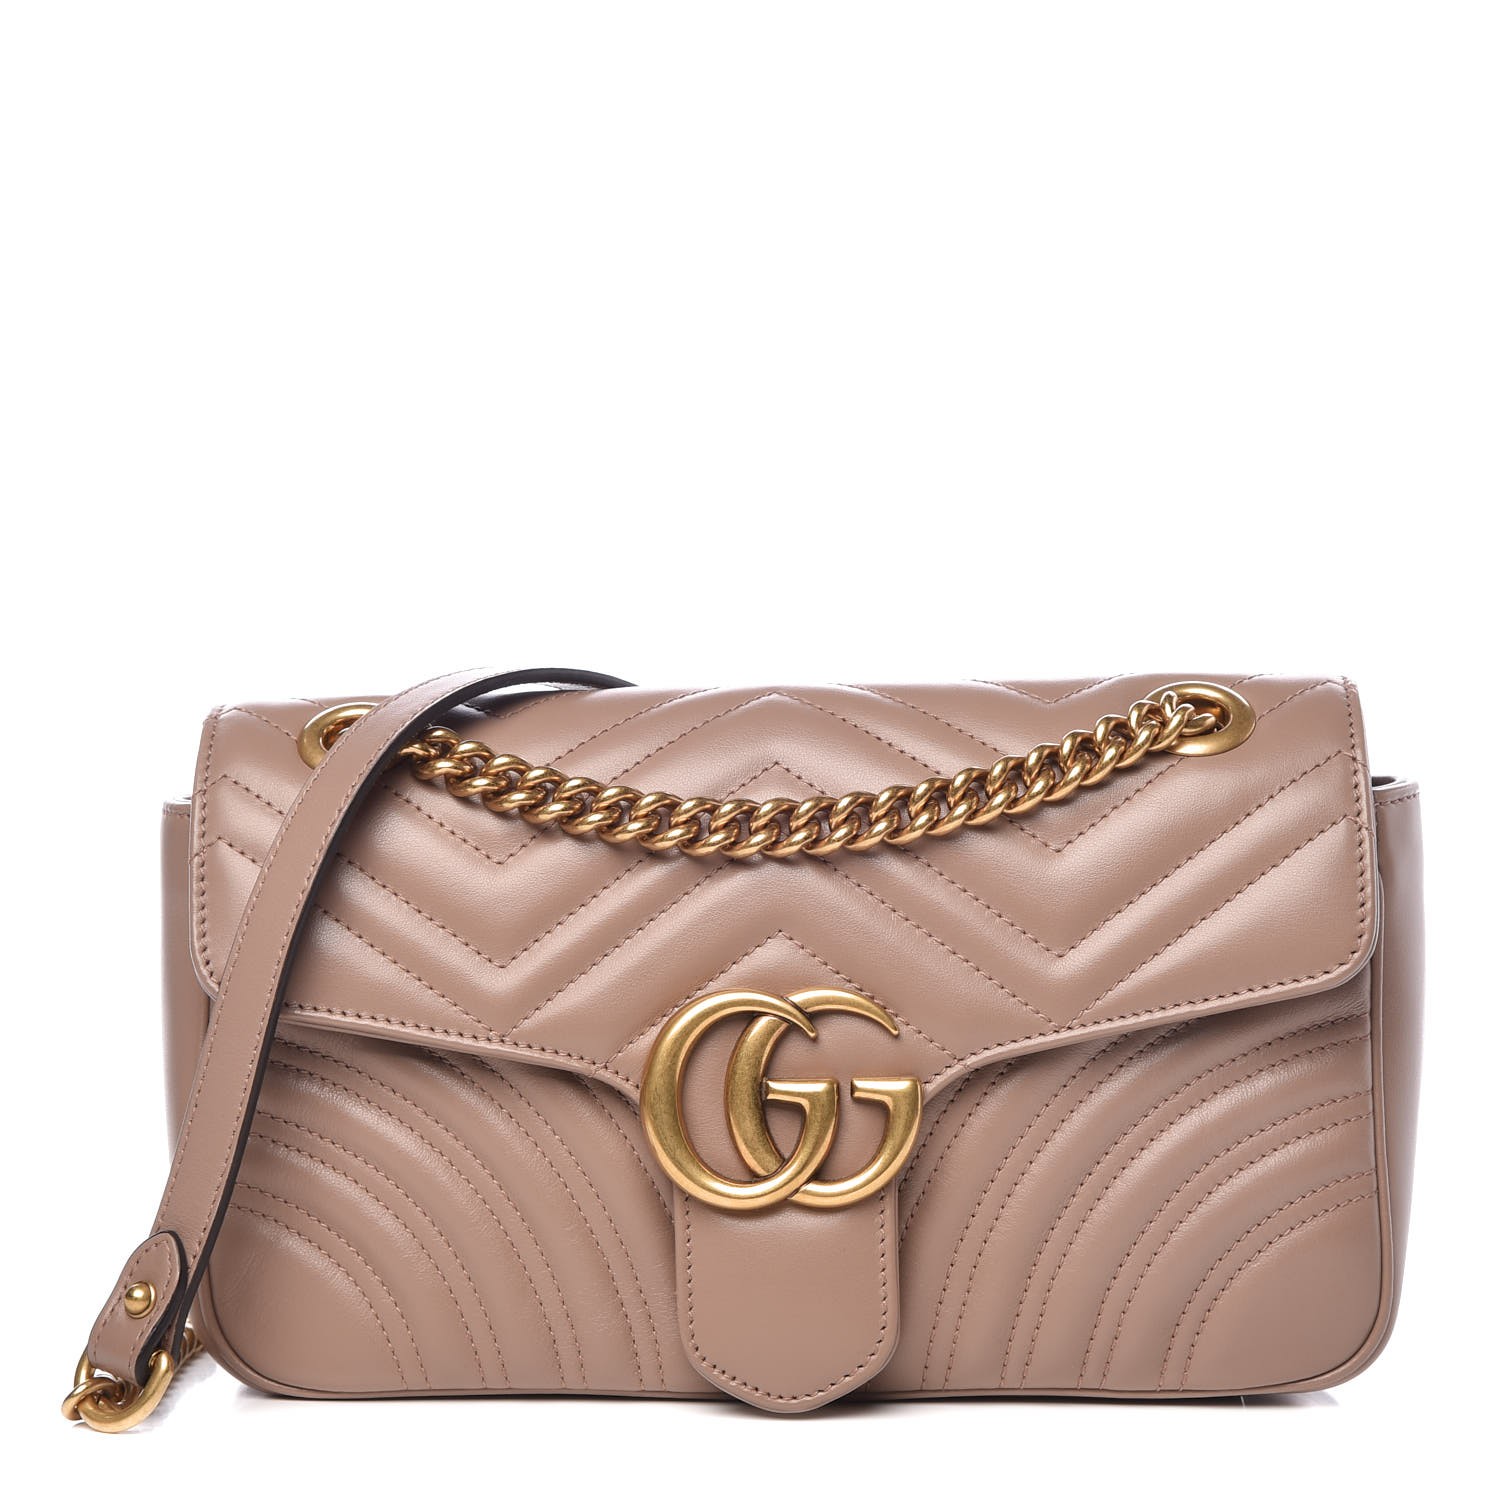 Gucci GG Marmont Small Matelasse Shoulder Bag Nude Pink 